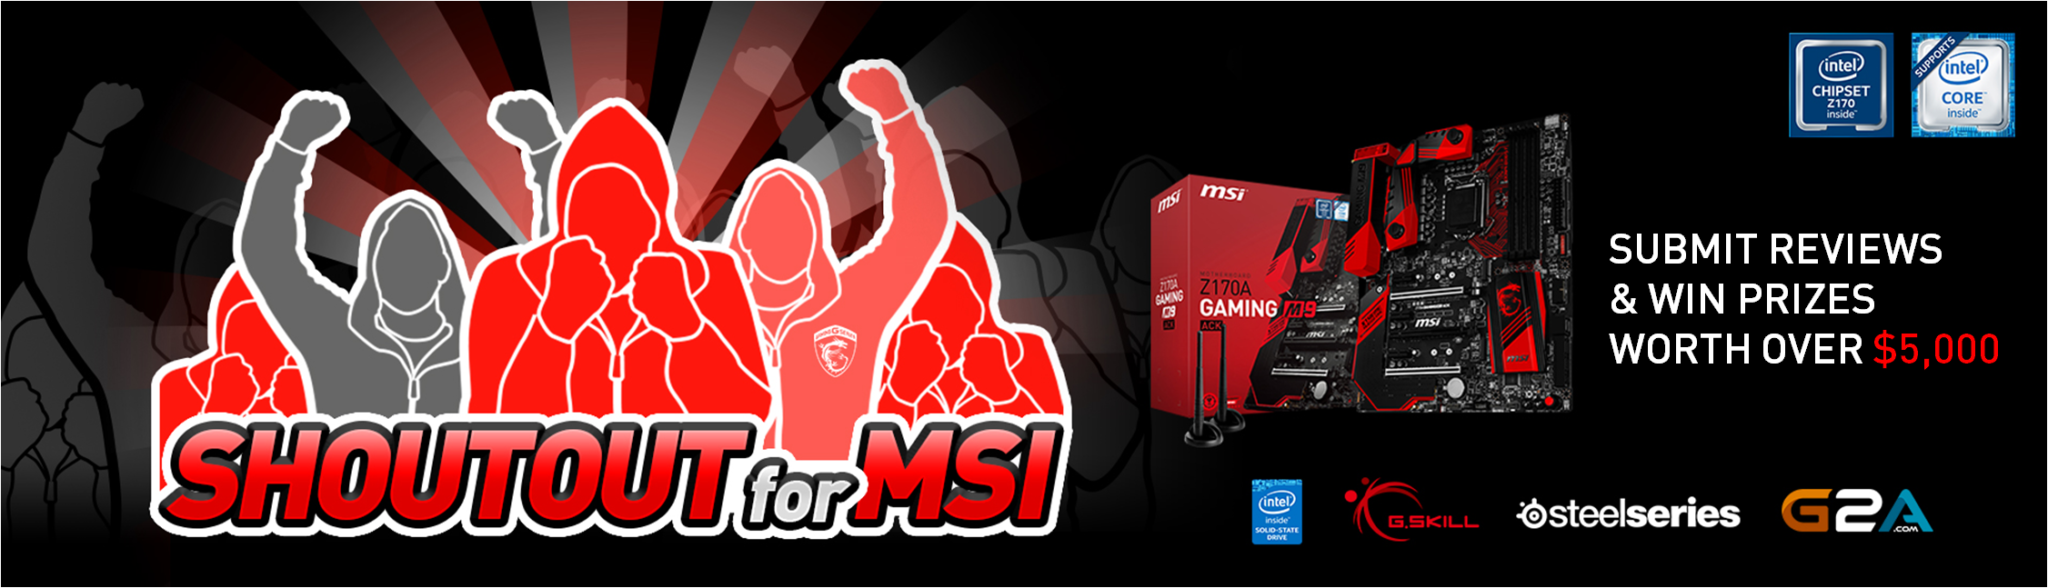 1. SHOUT OUT for MSI Online Campaign Launched Today